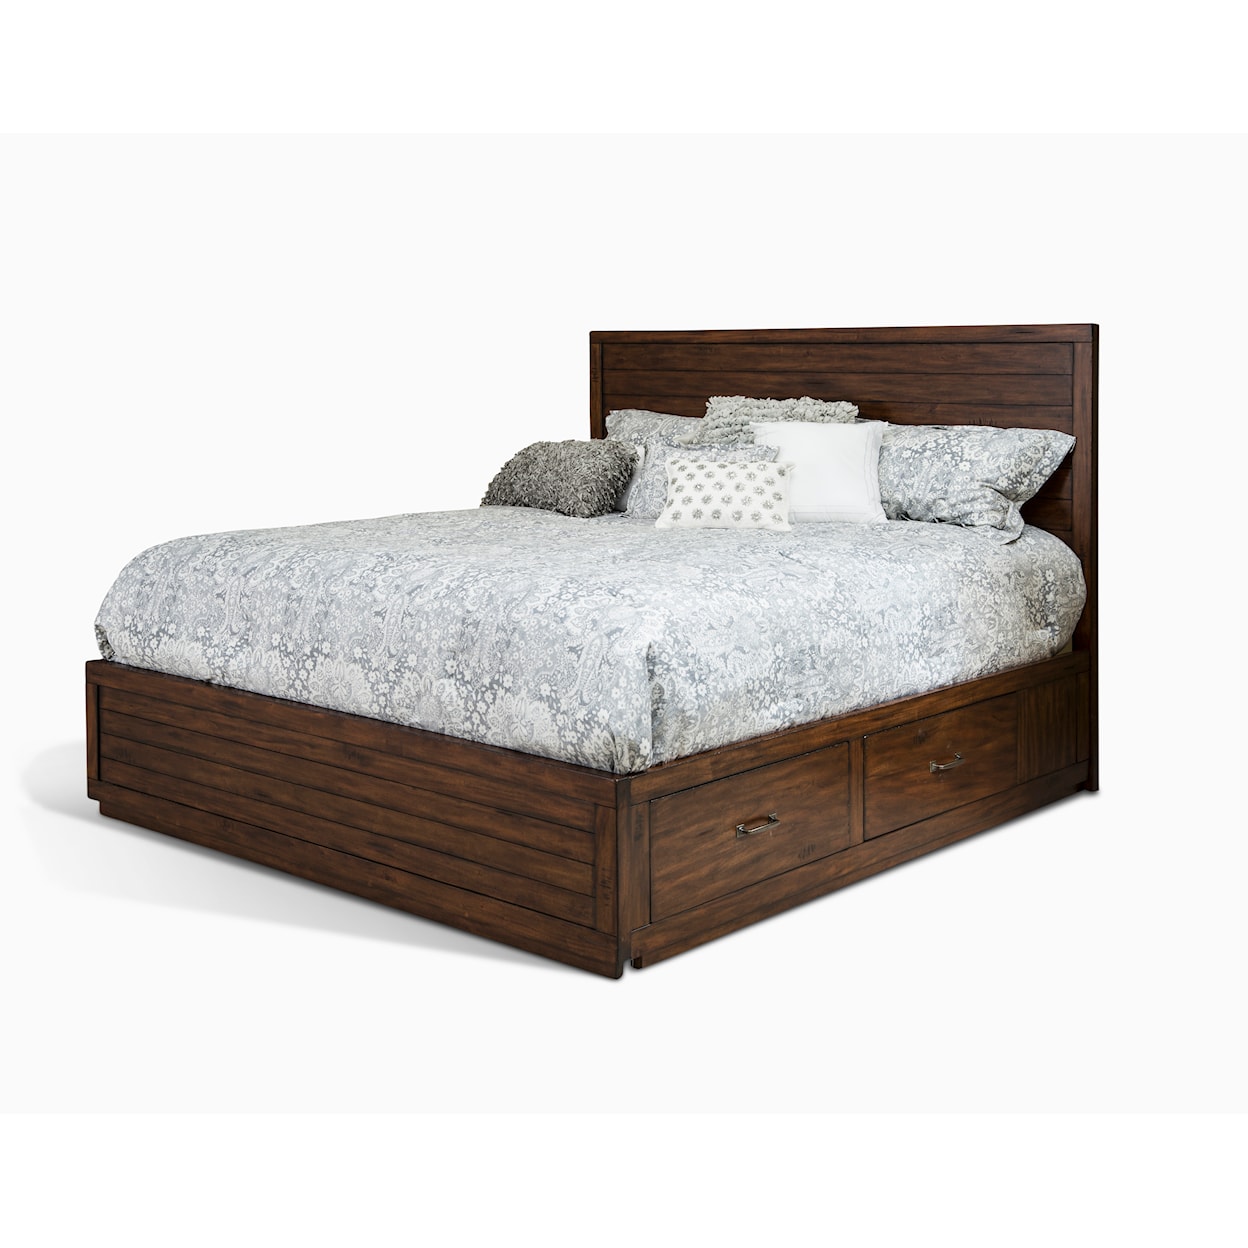 Sunny Designs Tuscany Queen Storage Bed